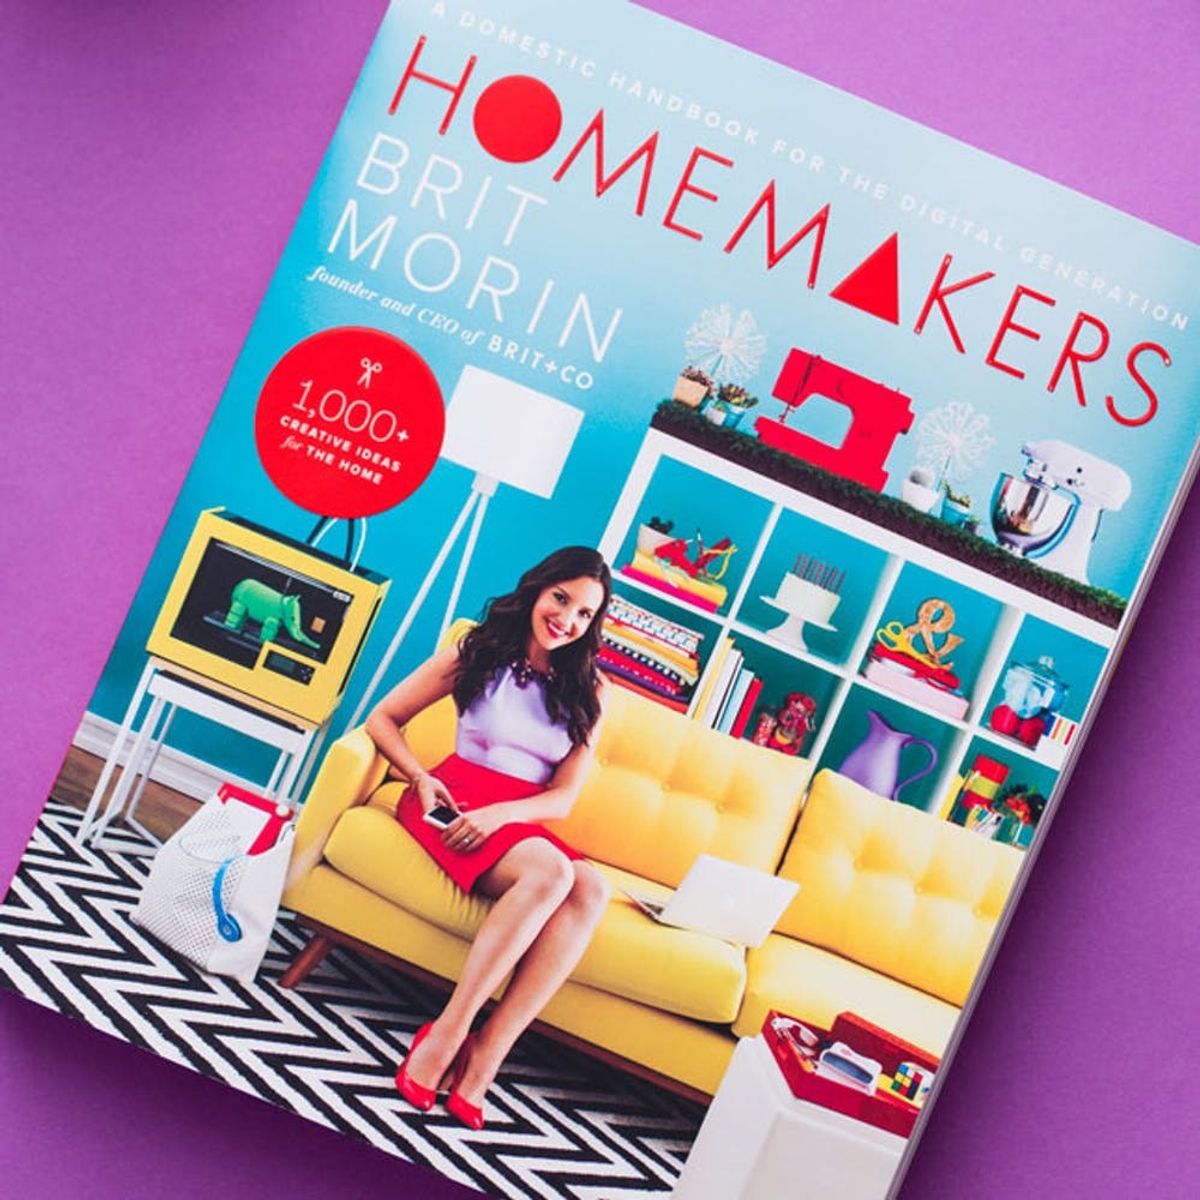 We’re Giving Away FREE Stuff When You Buy #Homemakers!